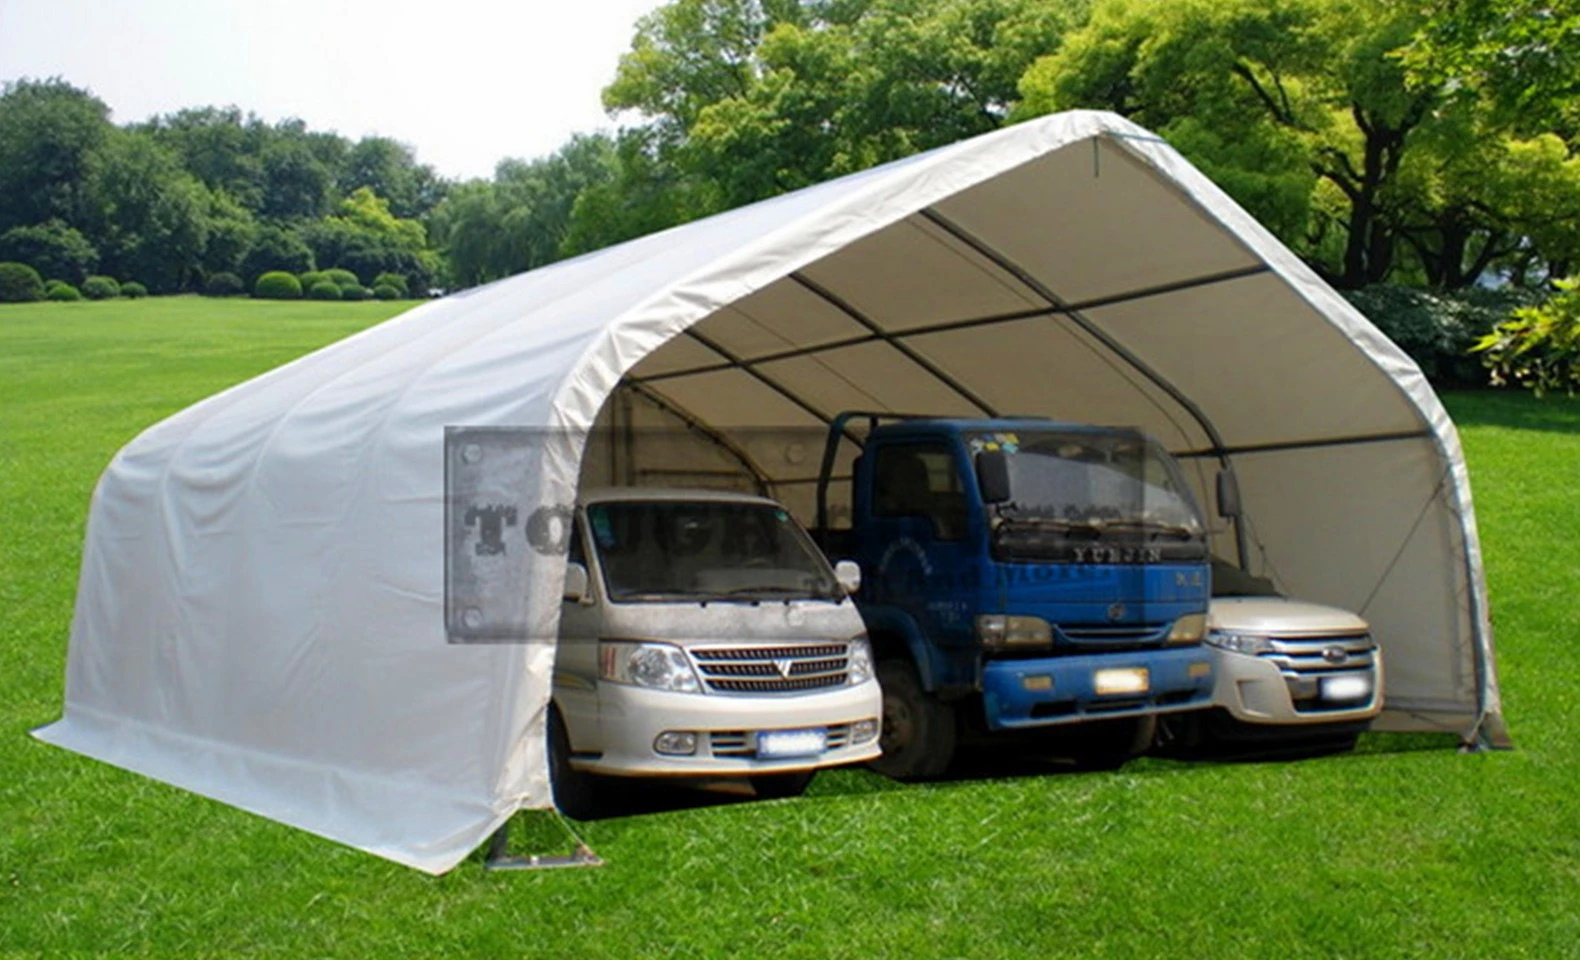 fabric covered portable shelter